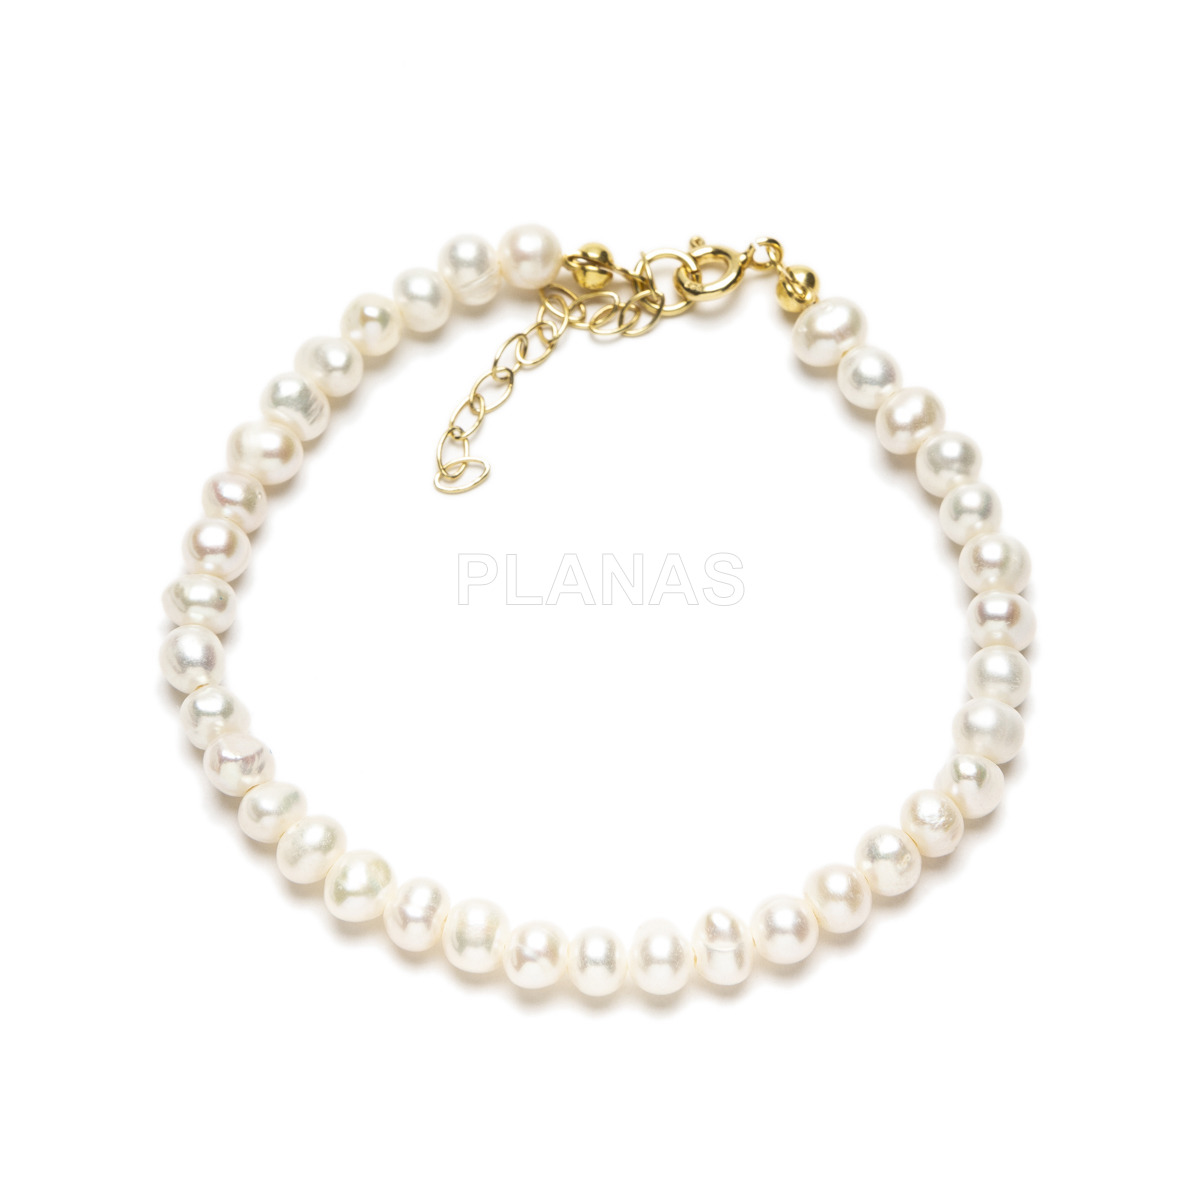 Set of necklace, bracelet and earrings in sterling silver and gold plated with cultured pearl.